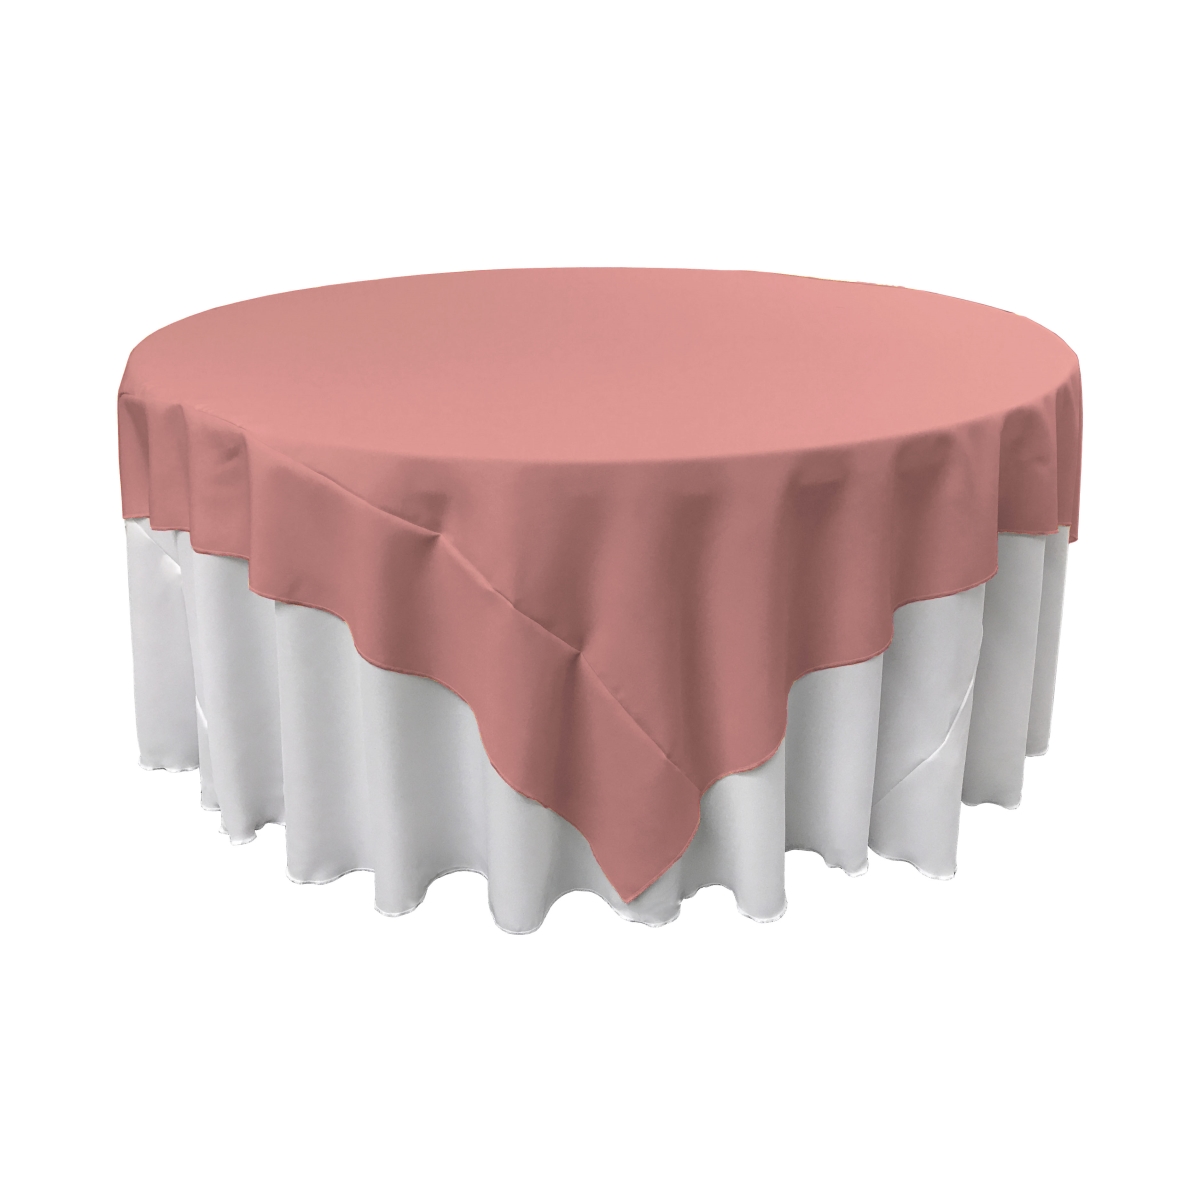 LA Linen TCpop72x72-RoseP79 Polyester Poplin Square Tablecloth, Dusty Rose - 72 x 72 in.